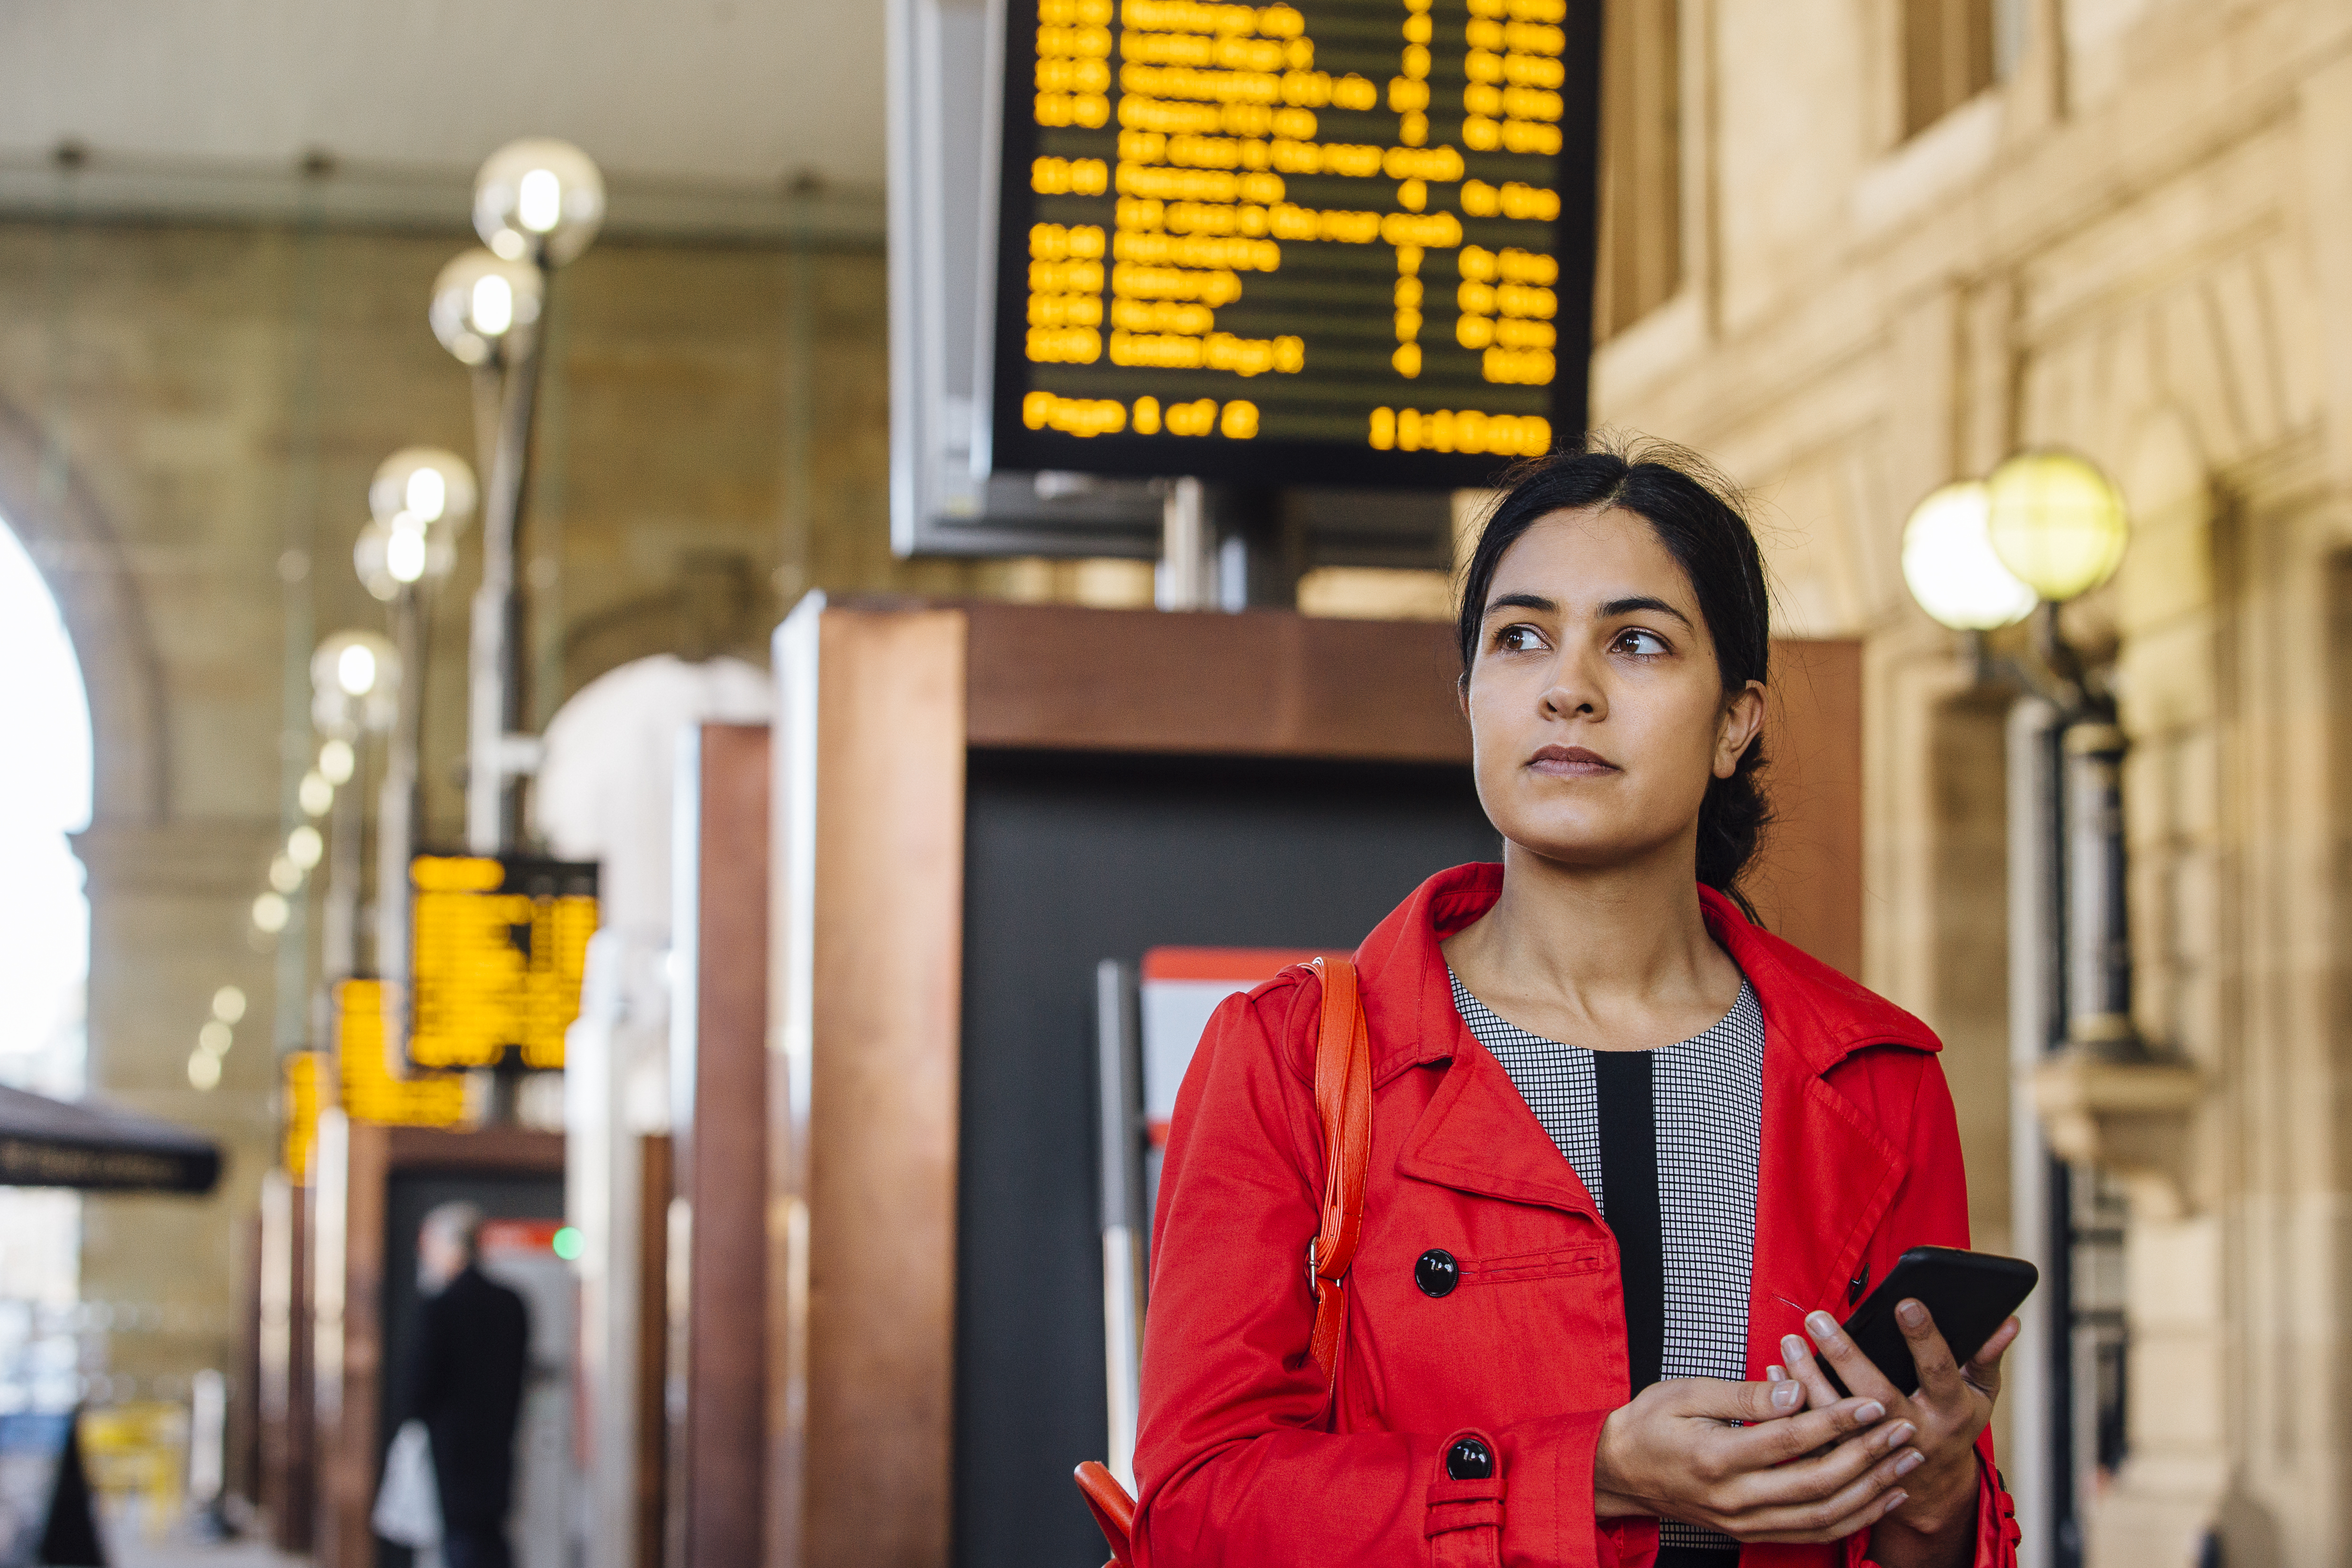 Female communter in foreground holding smart phone in train station with electronic display boards.